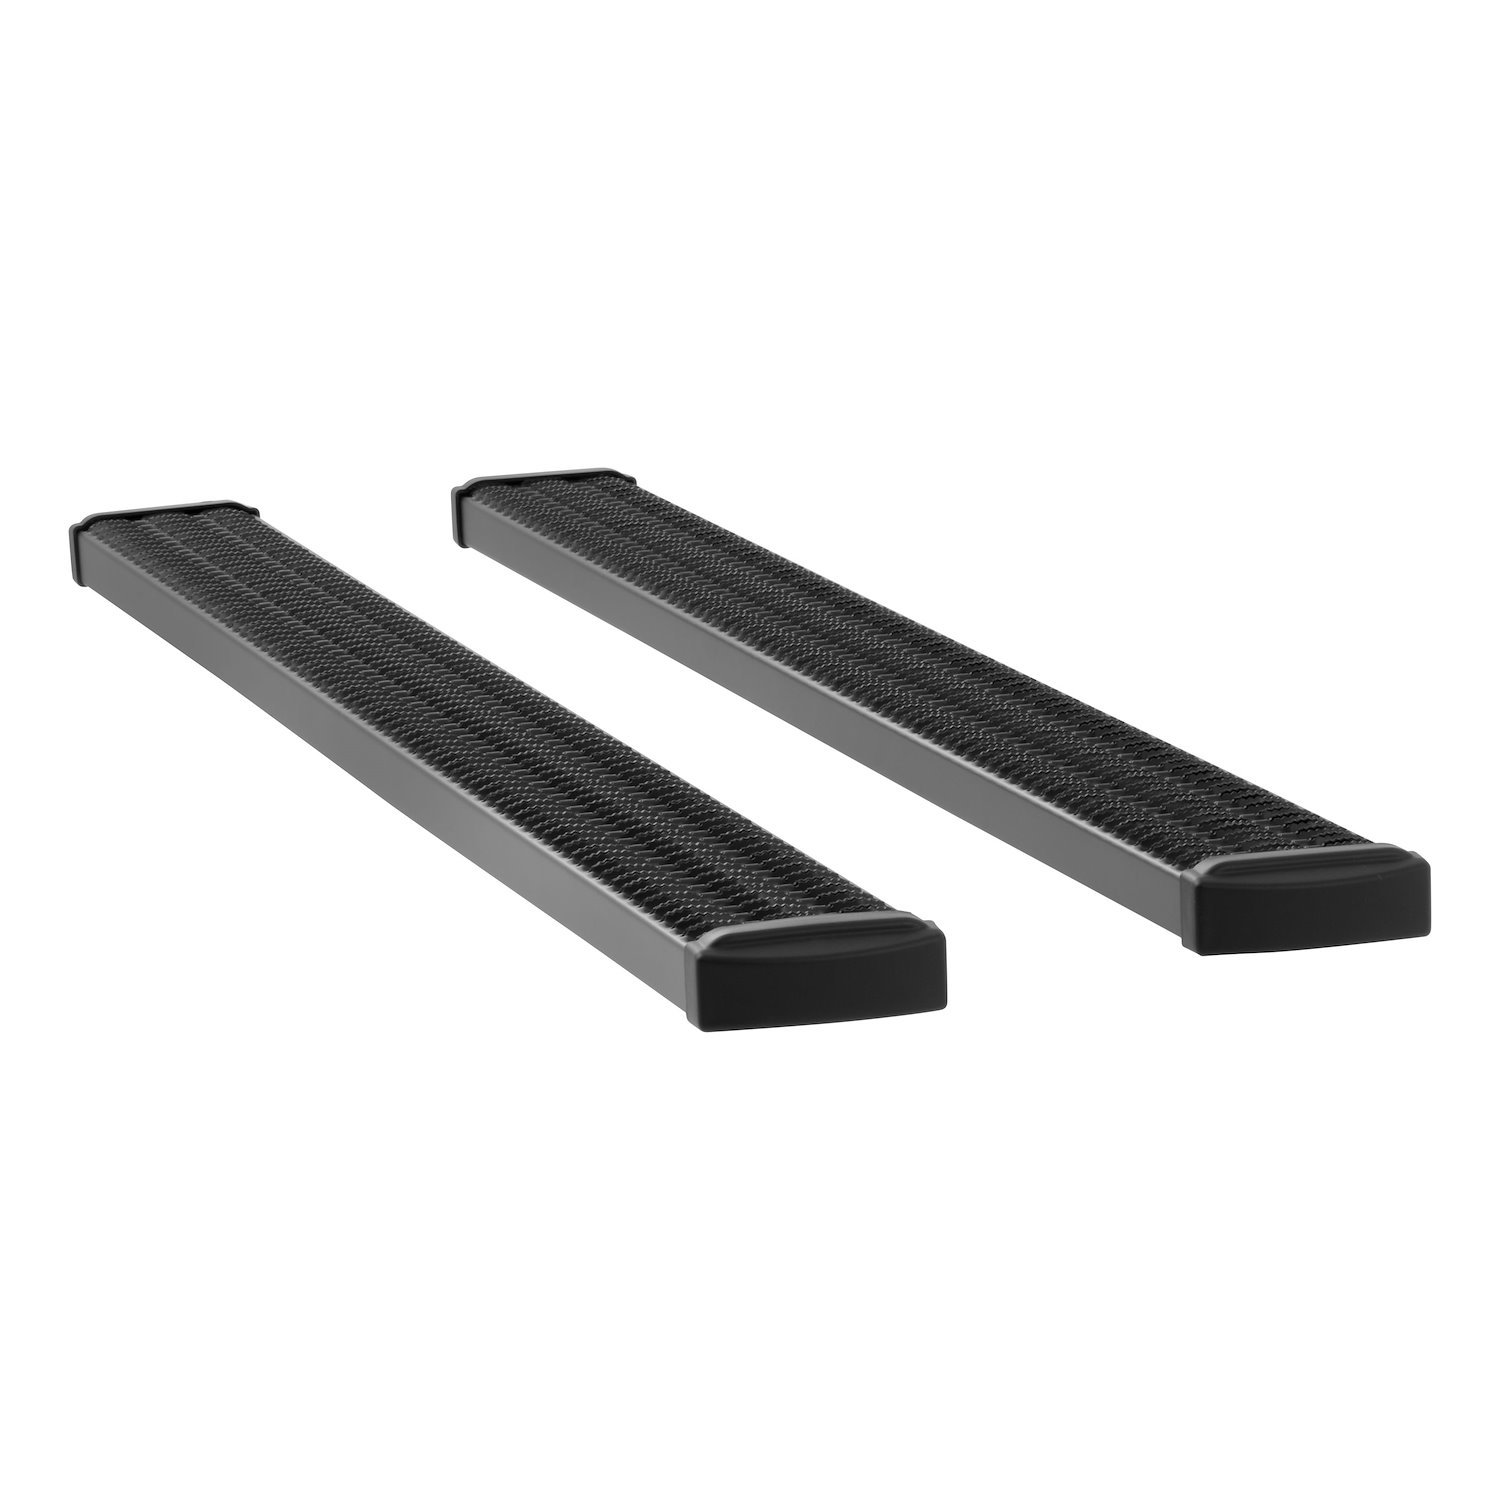 415088-401113 Grip Step 7 in. x 88 in. Black Aluminum Running Boards Fits Select Chevy Silverado, GMC Sierra